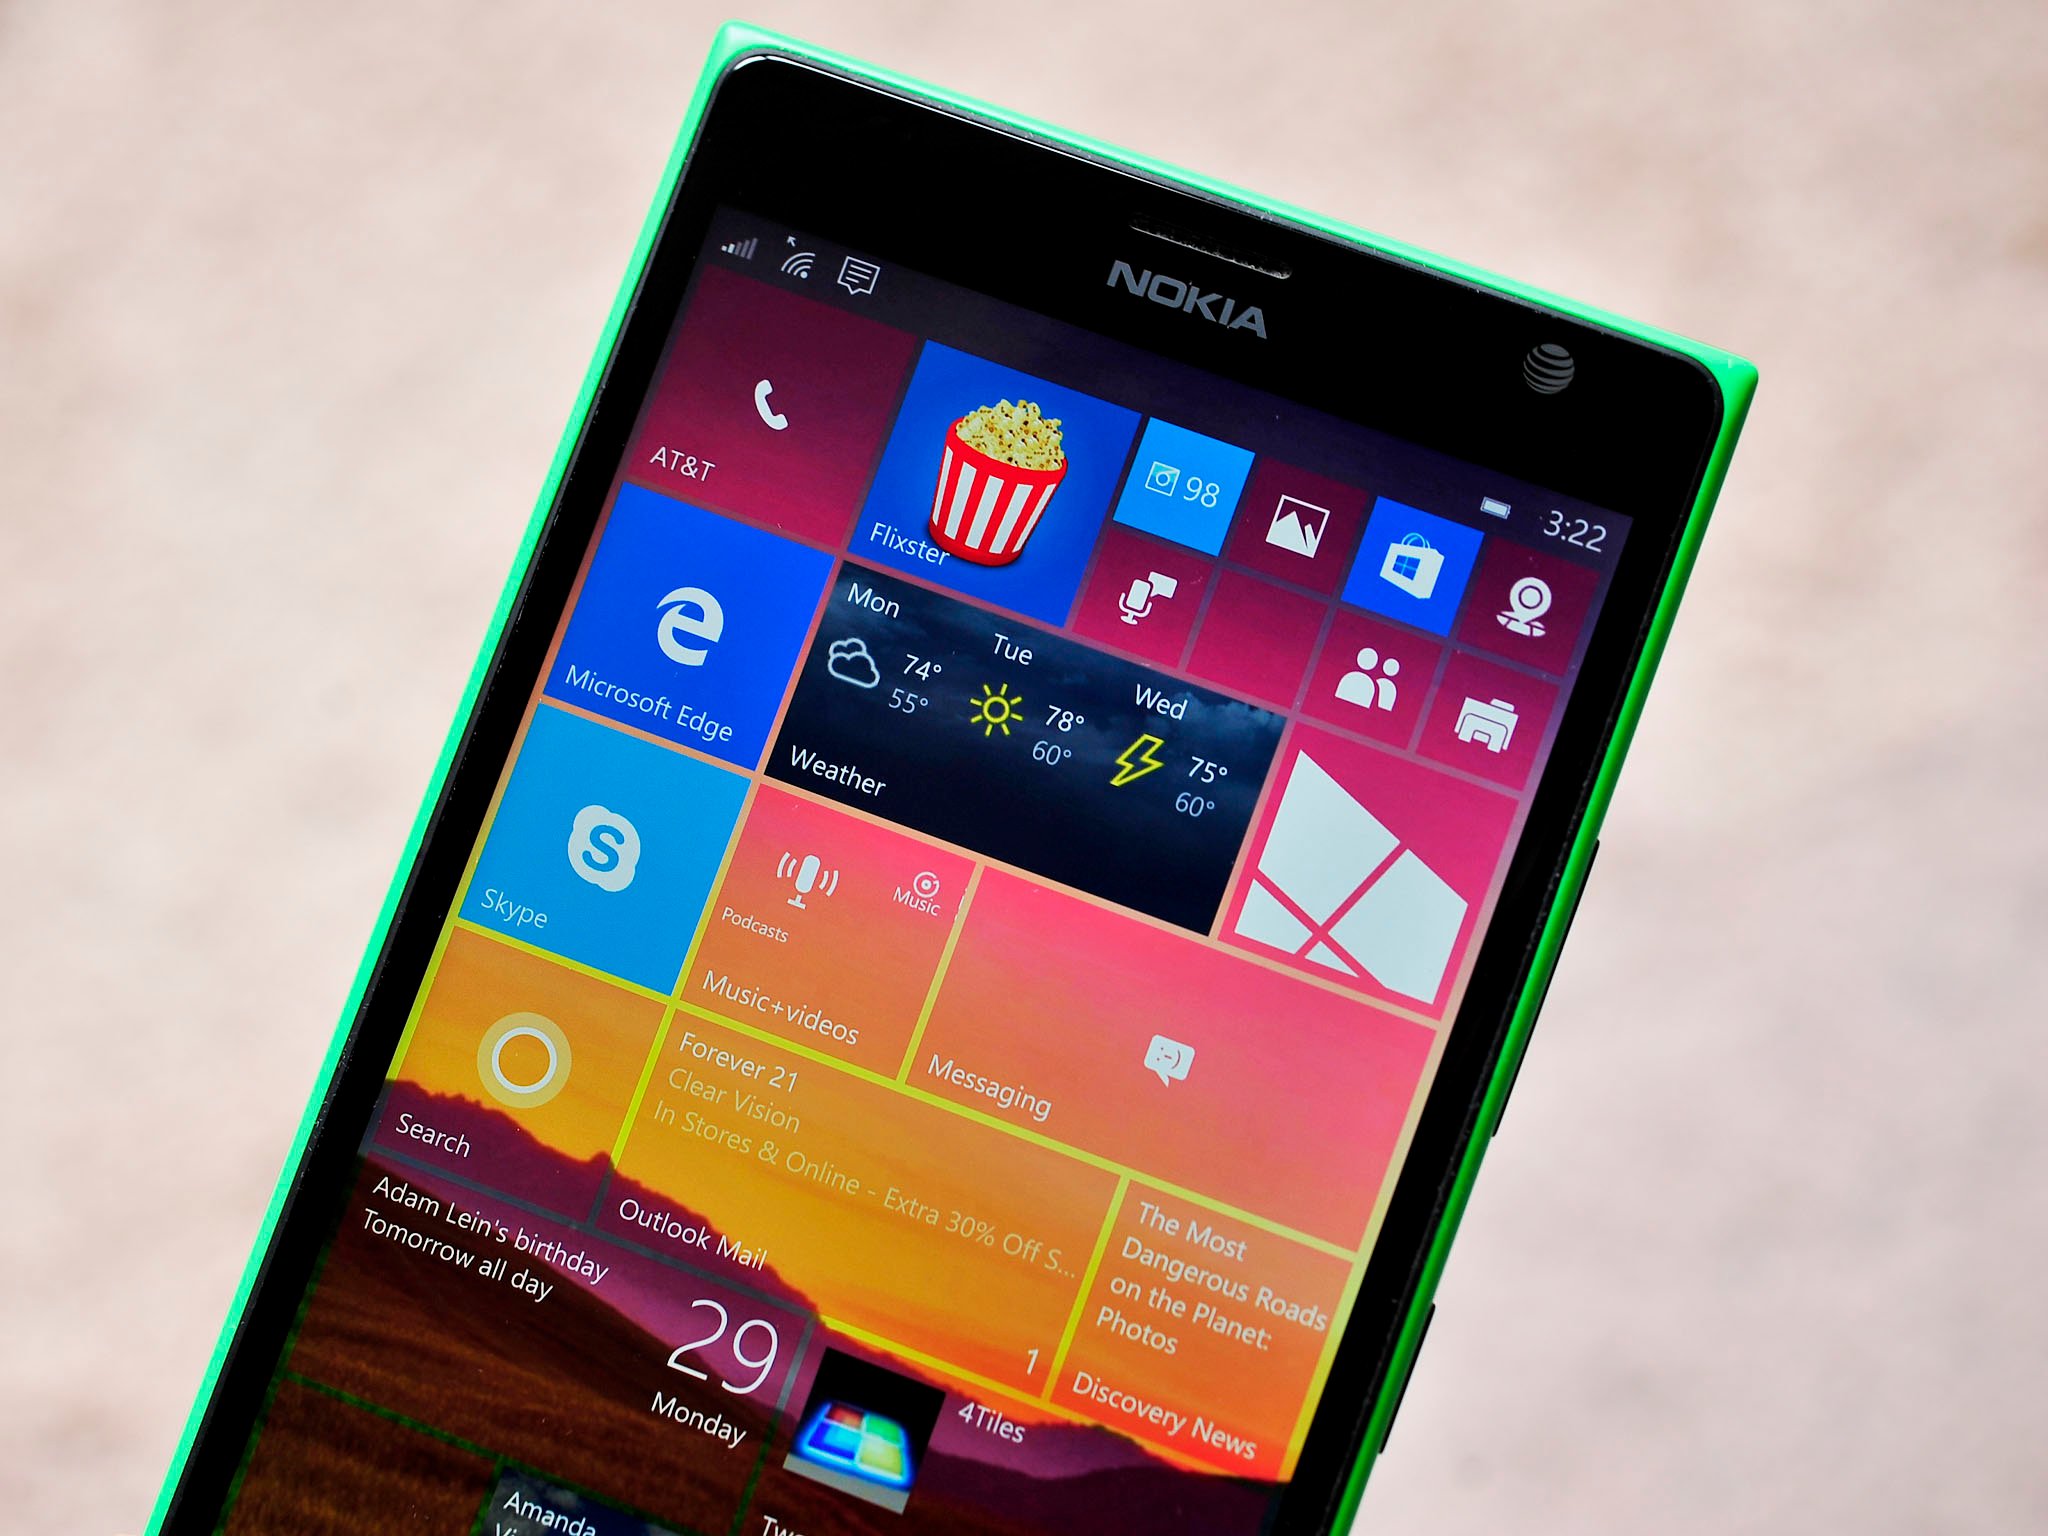 Windows 10 Mobile will be better at handling network activity for suspended apps